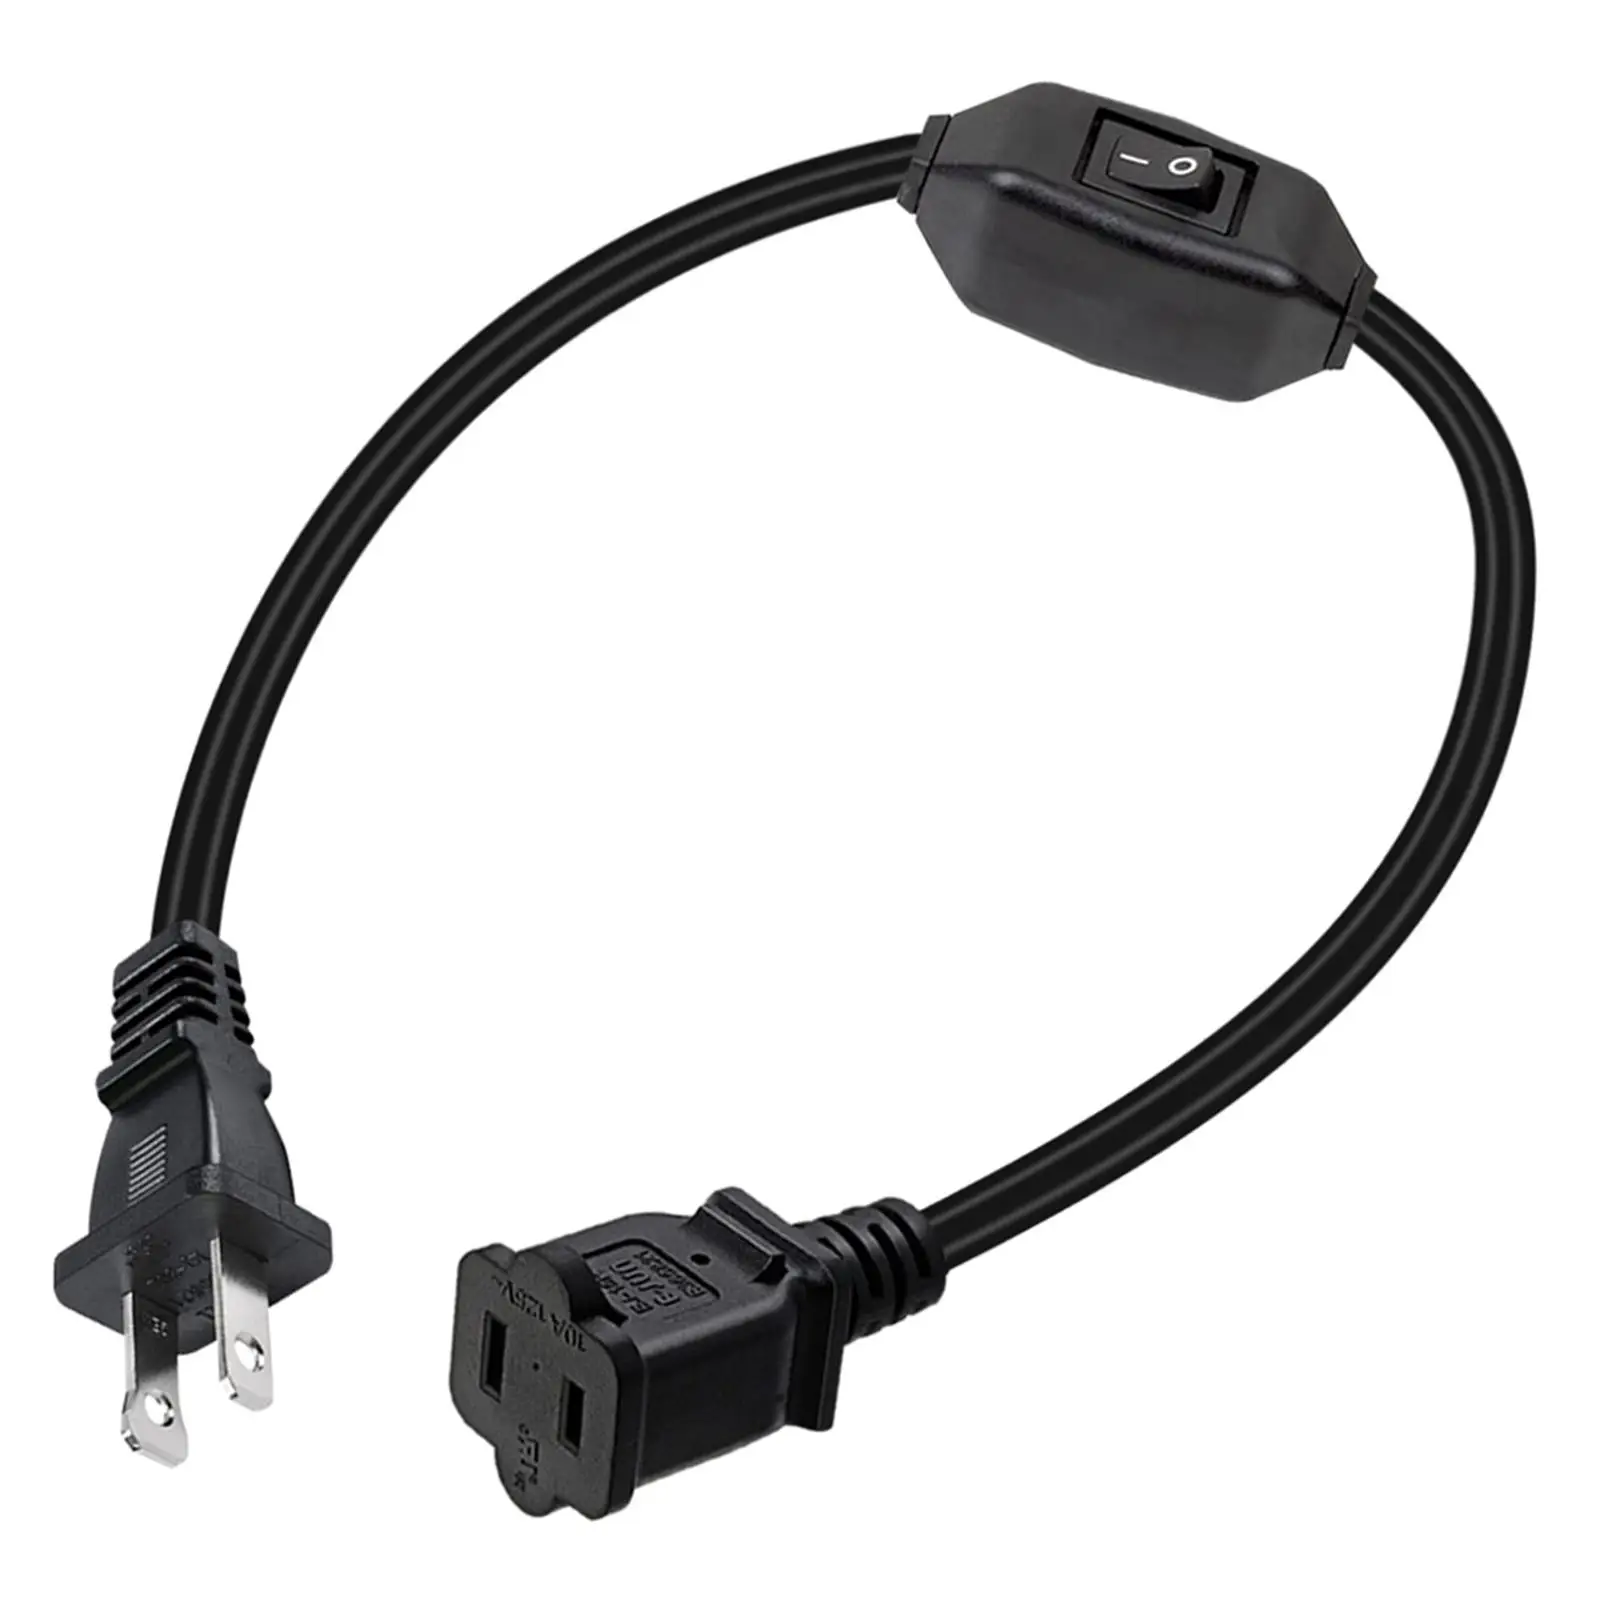 32cm Extension Cord 2 Prong Power Supply Cord 13A 125V US Strandard on/ off Durable 2500W for fan Lamp